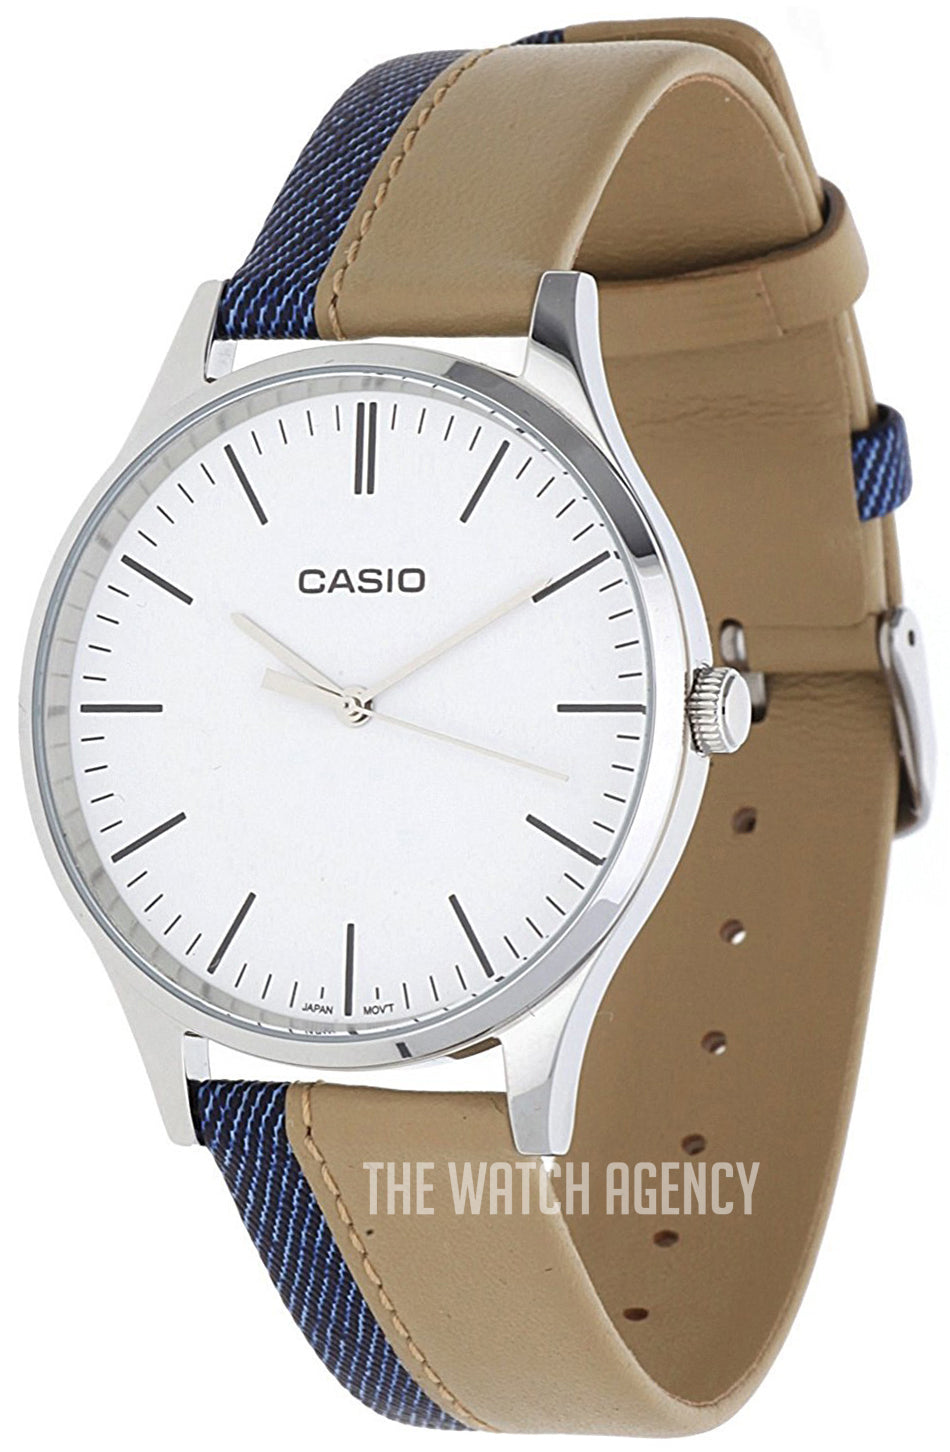 Casio, Unisex Watch Analog, White Dial Blue & Beige Leather Band, MTP-E133L-7EDF